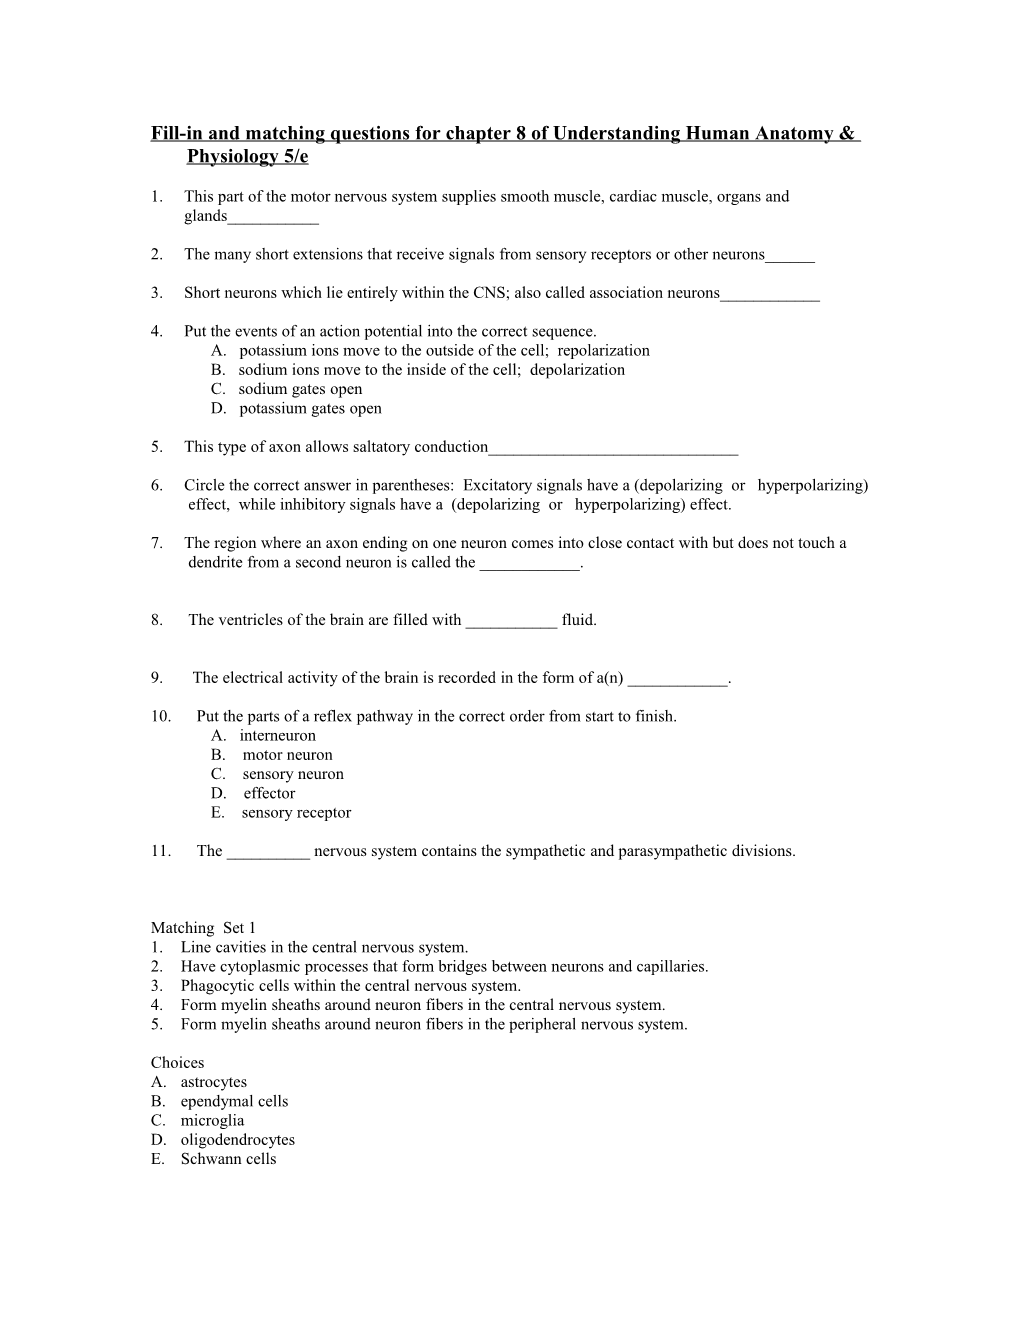 Fill-In and Matching Questions for Chapter 8 of Understanding Human Anatomy & Physiology 4/E